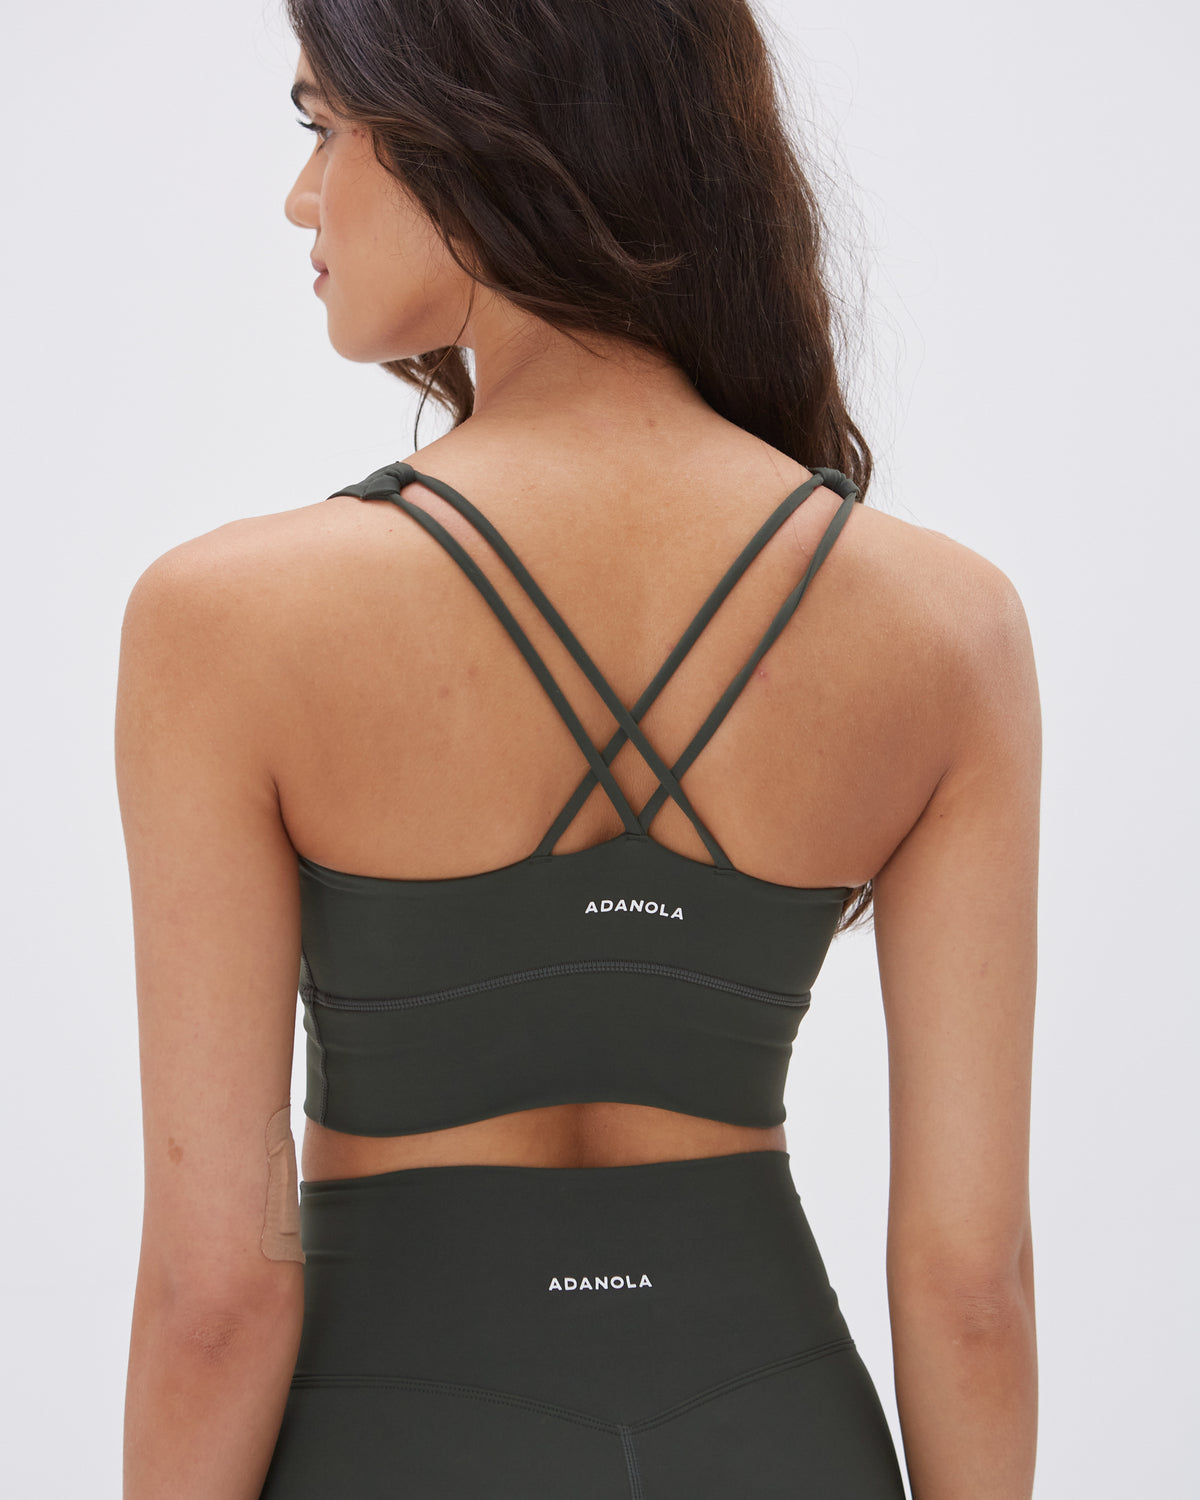 Stay supported during your workouts with Oalka Women's Racerback